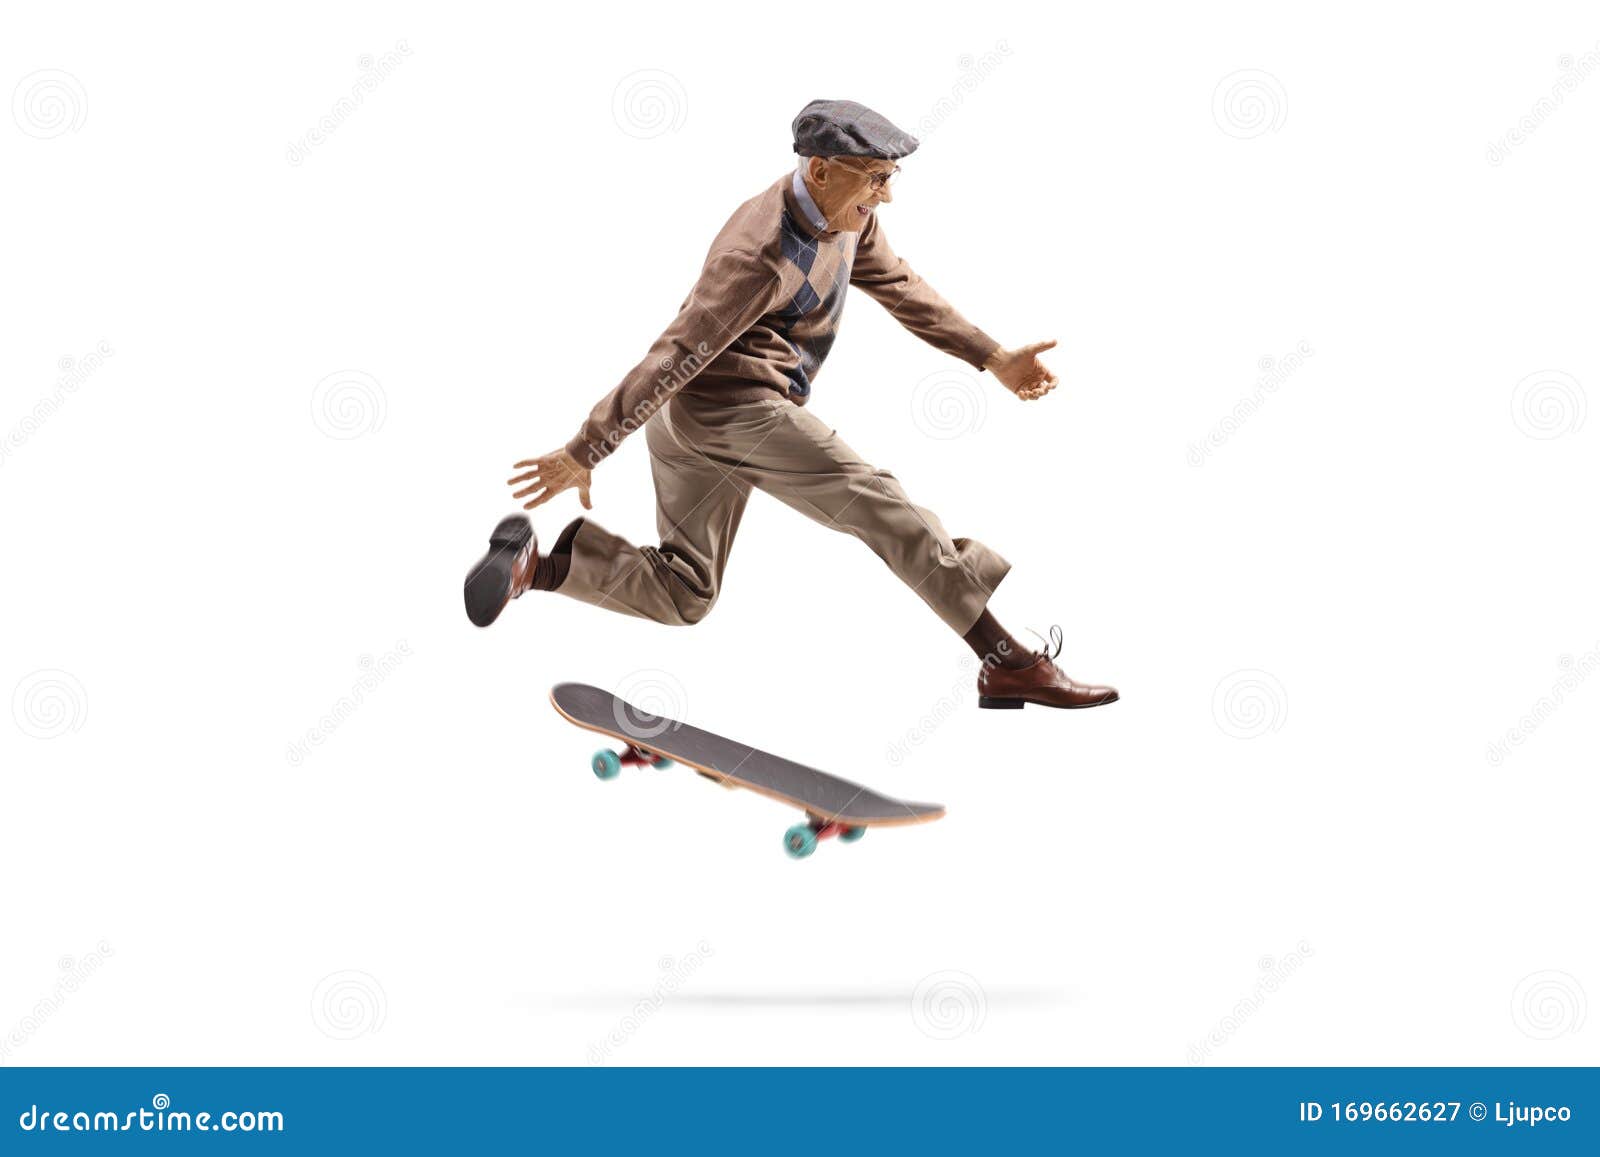 Energetic Elderly Man Jumping with a Skateboard Stock Image - Image of ...